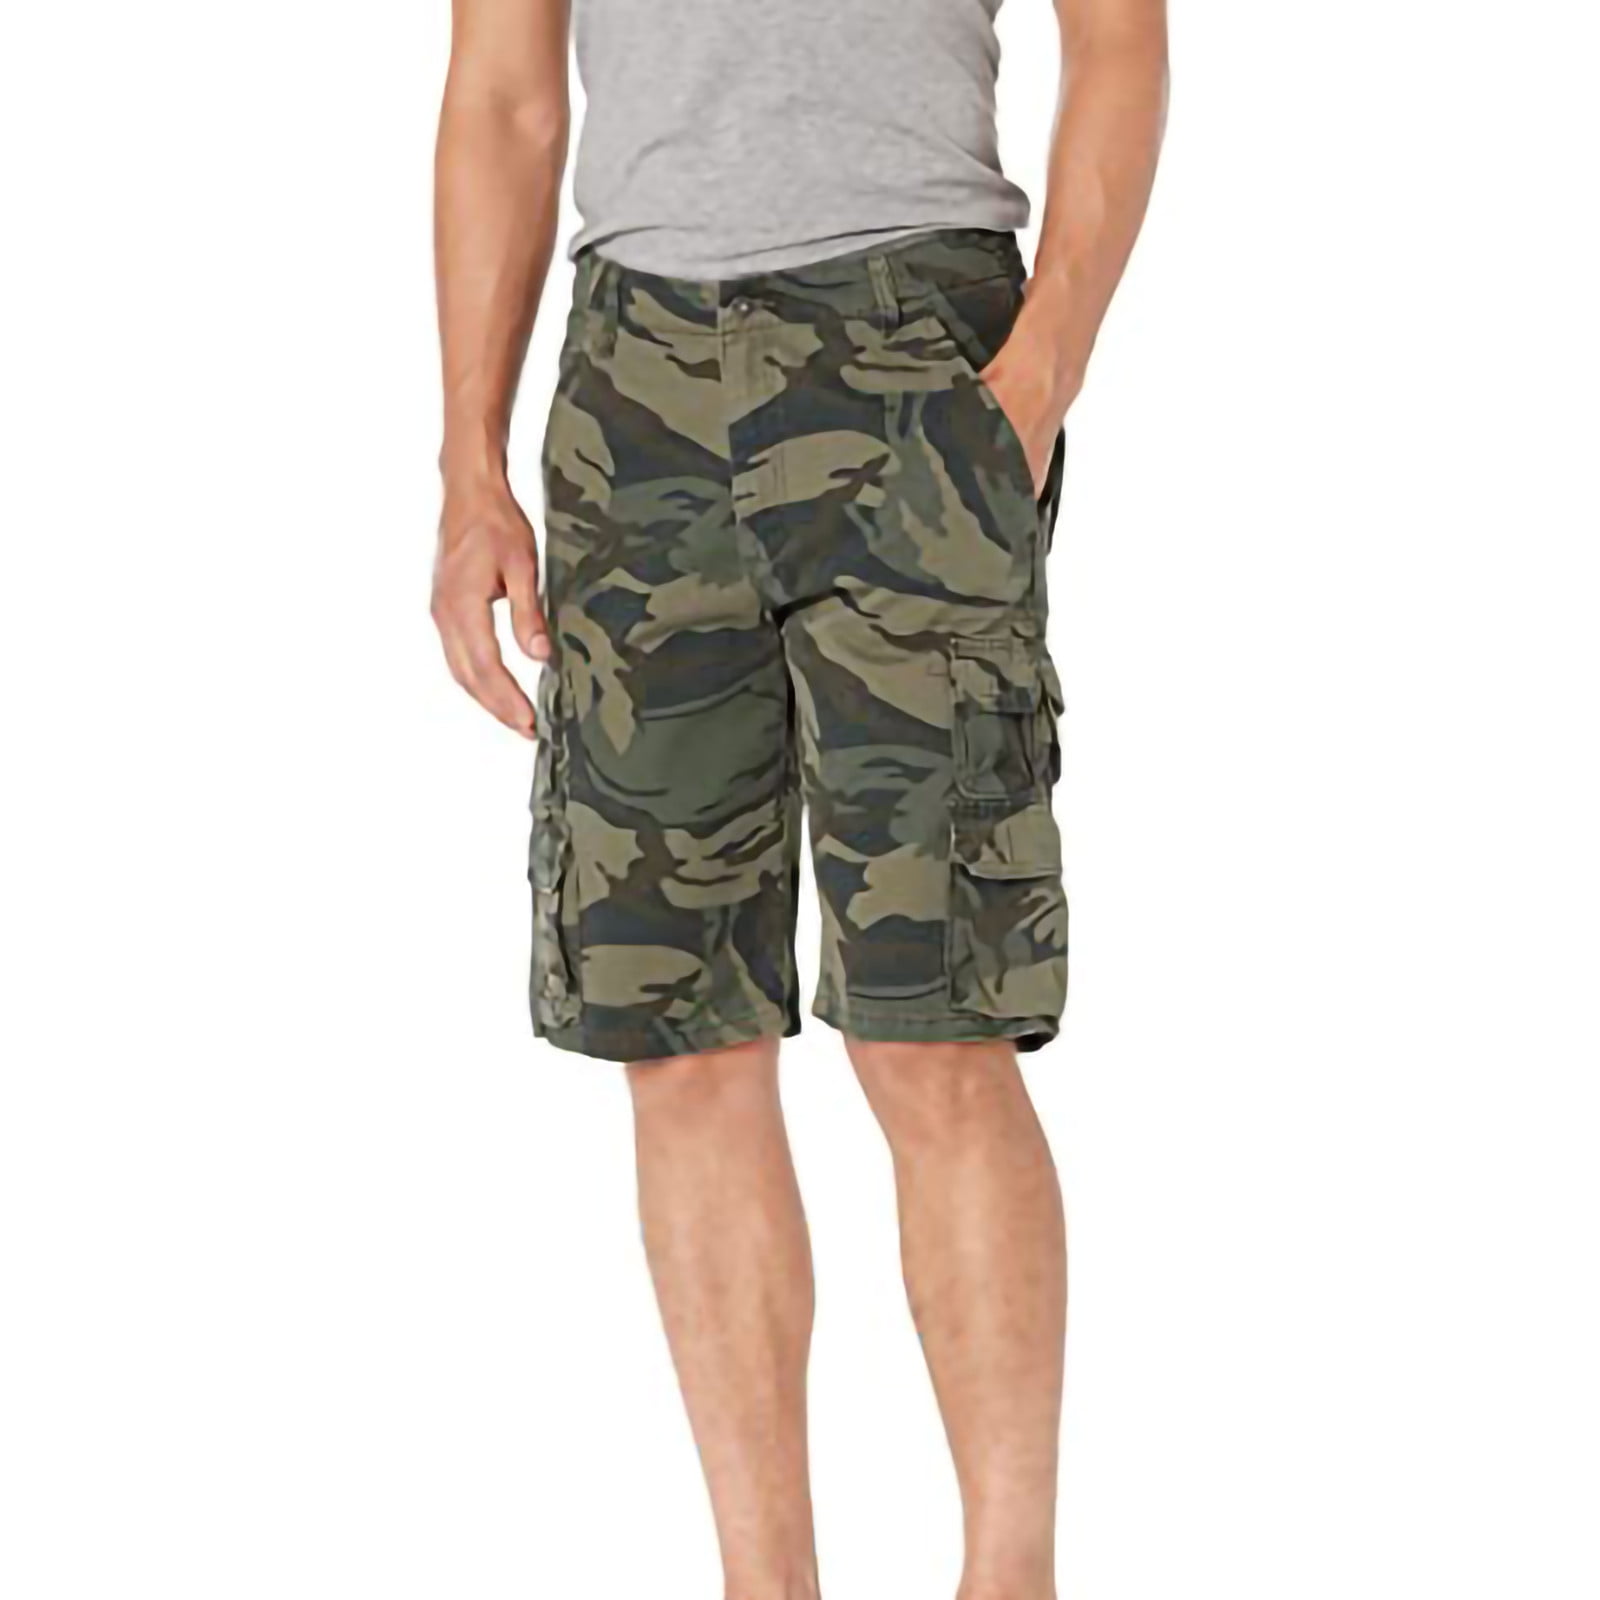 ROBO Classic Camo Cargo Shorts Mens Leisure Multi-Pockets Short Relaxed Fit